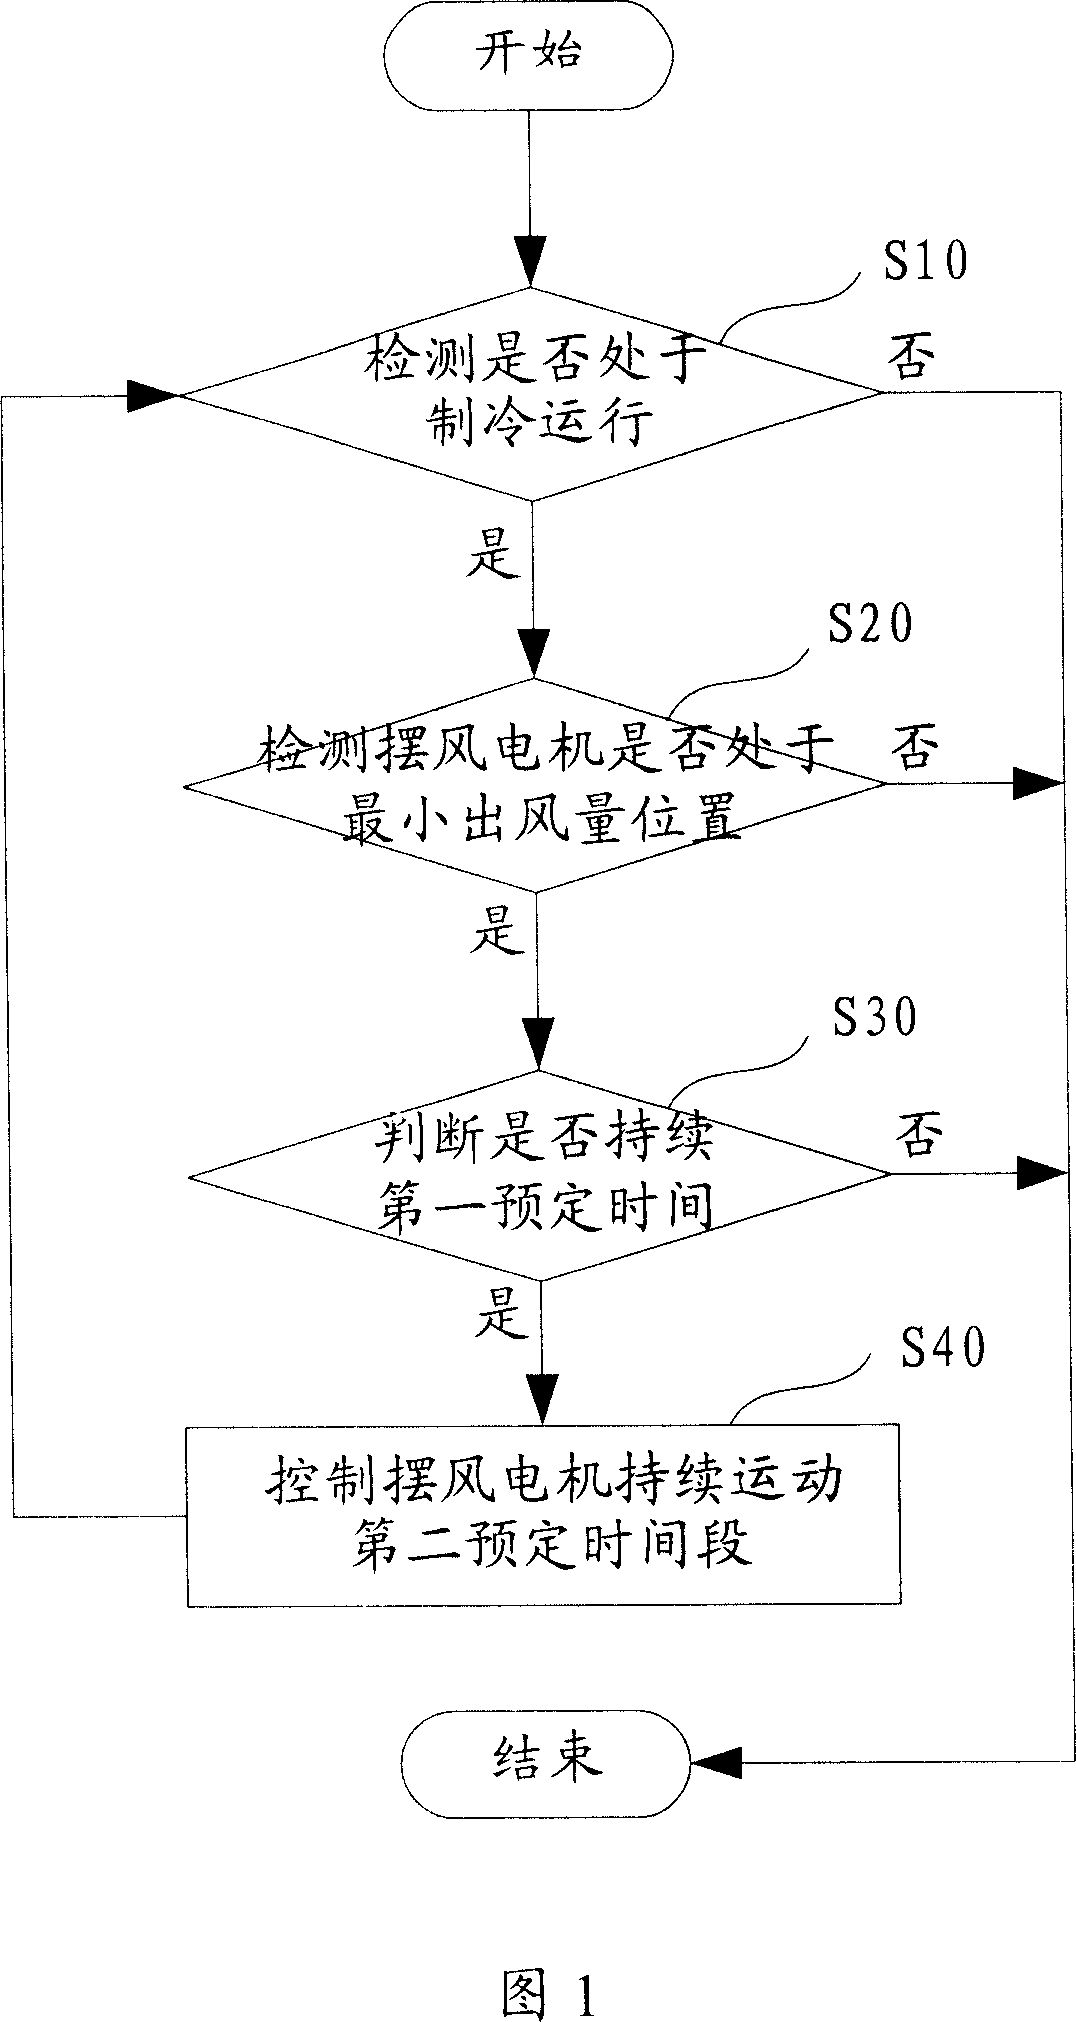 Method of preventing dewing of air conditioner